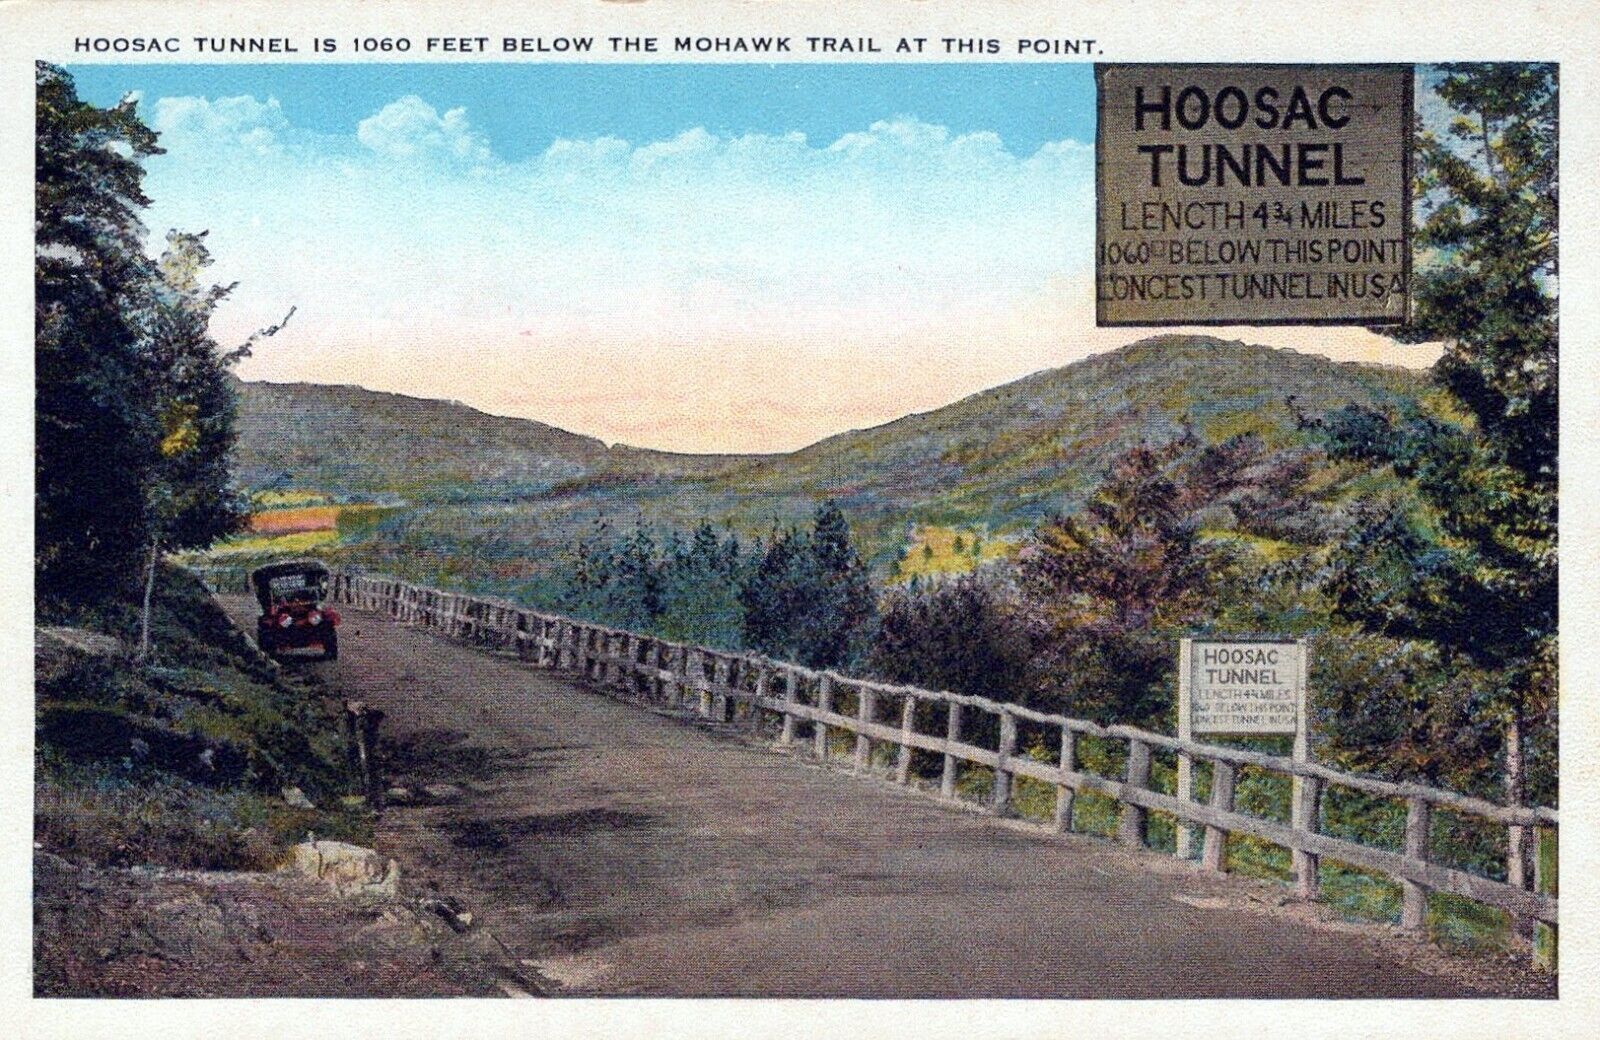 Hoosac Tunnel 1060 Feet Below Mohawk Trail at this Point Sign Postcard